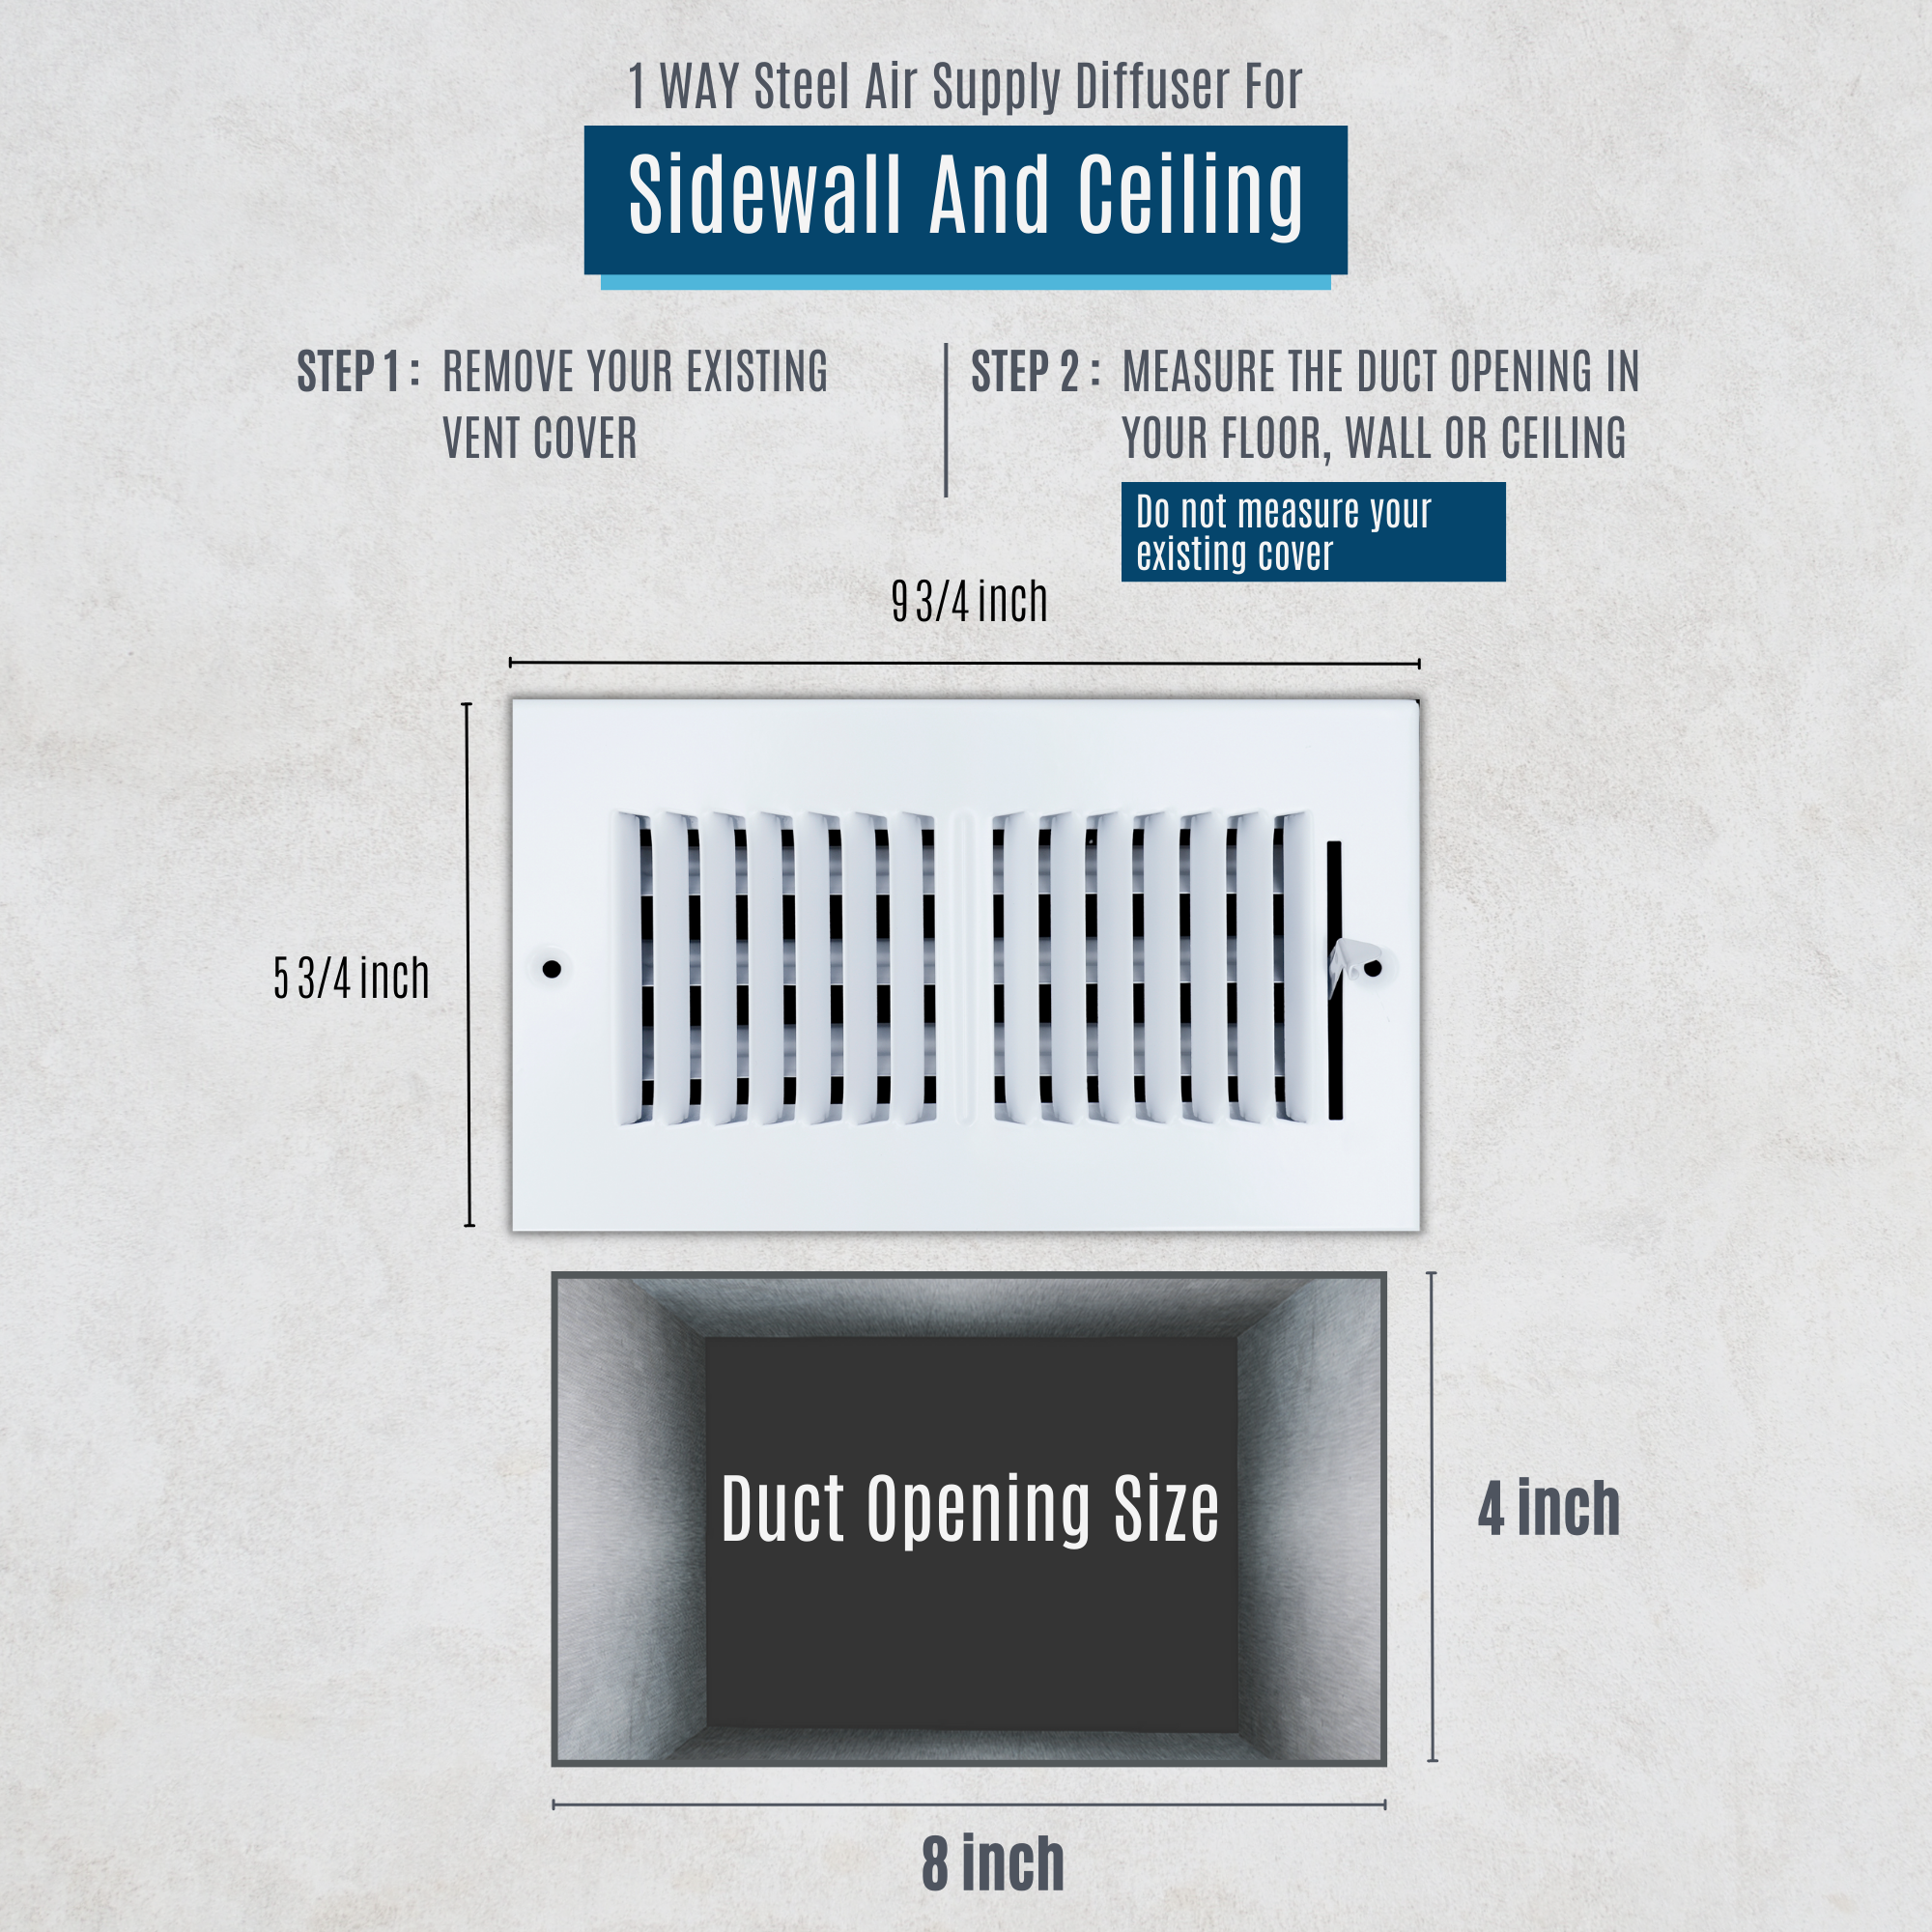 8 X 4 Duct Opening | 2 WAY Steel Air Supply Diffuser for Sidewall and Ceiling